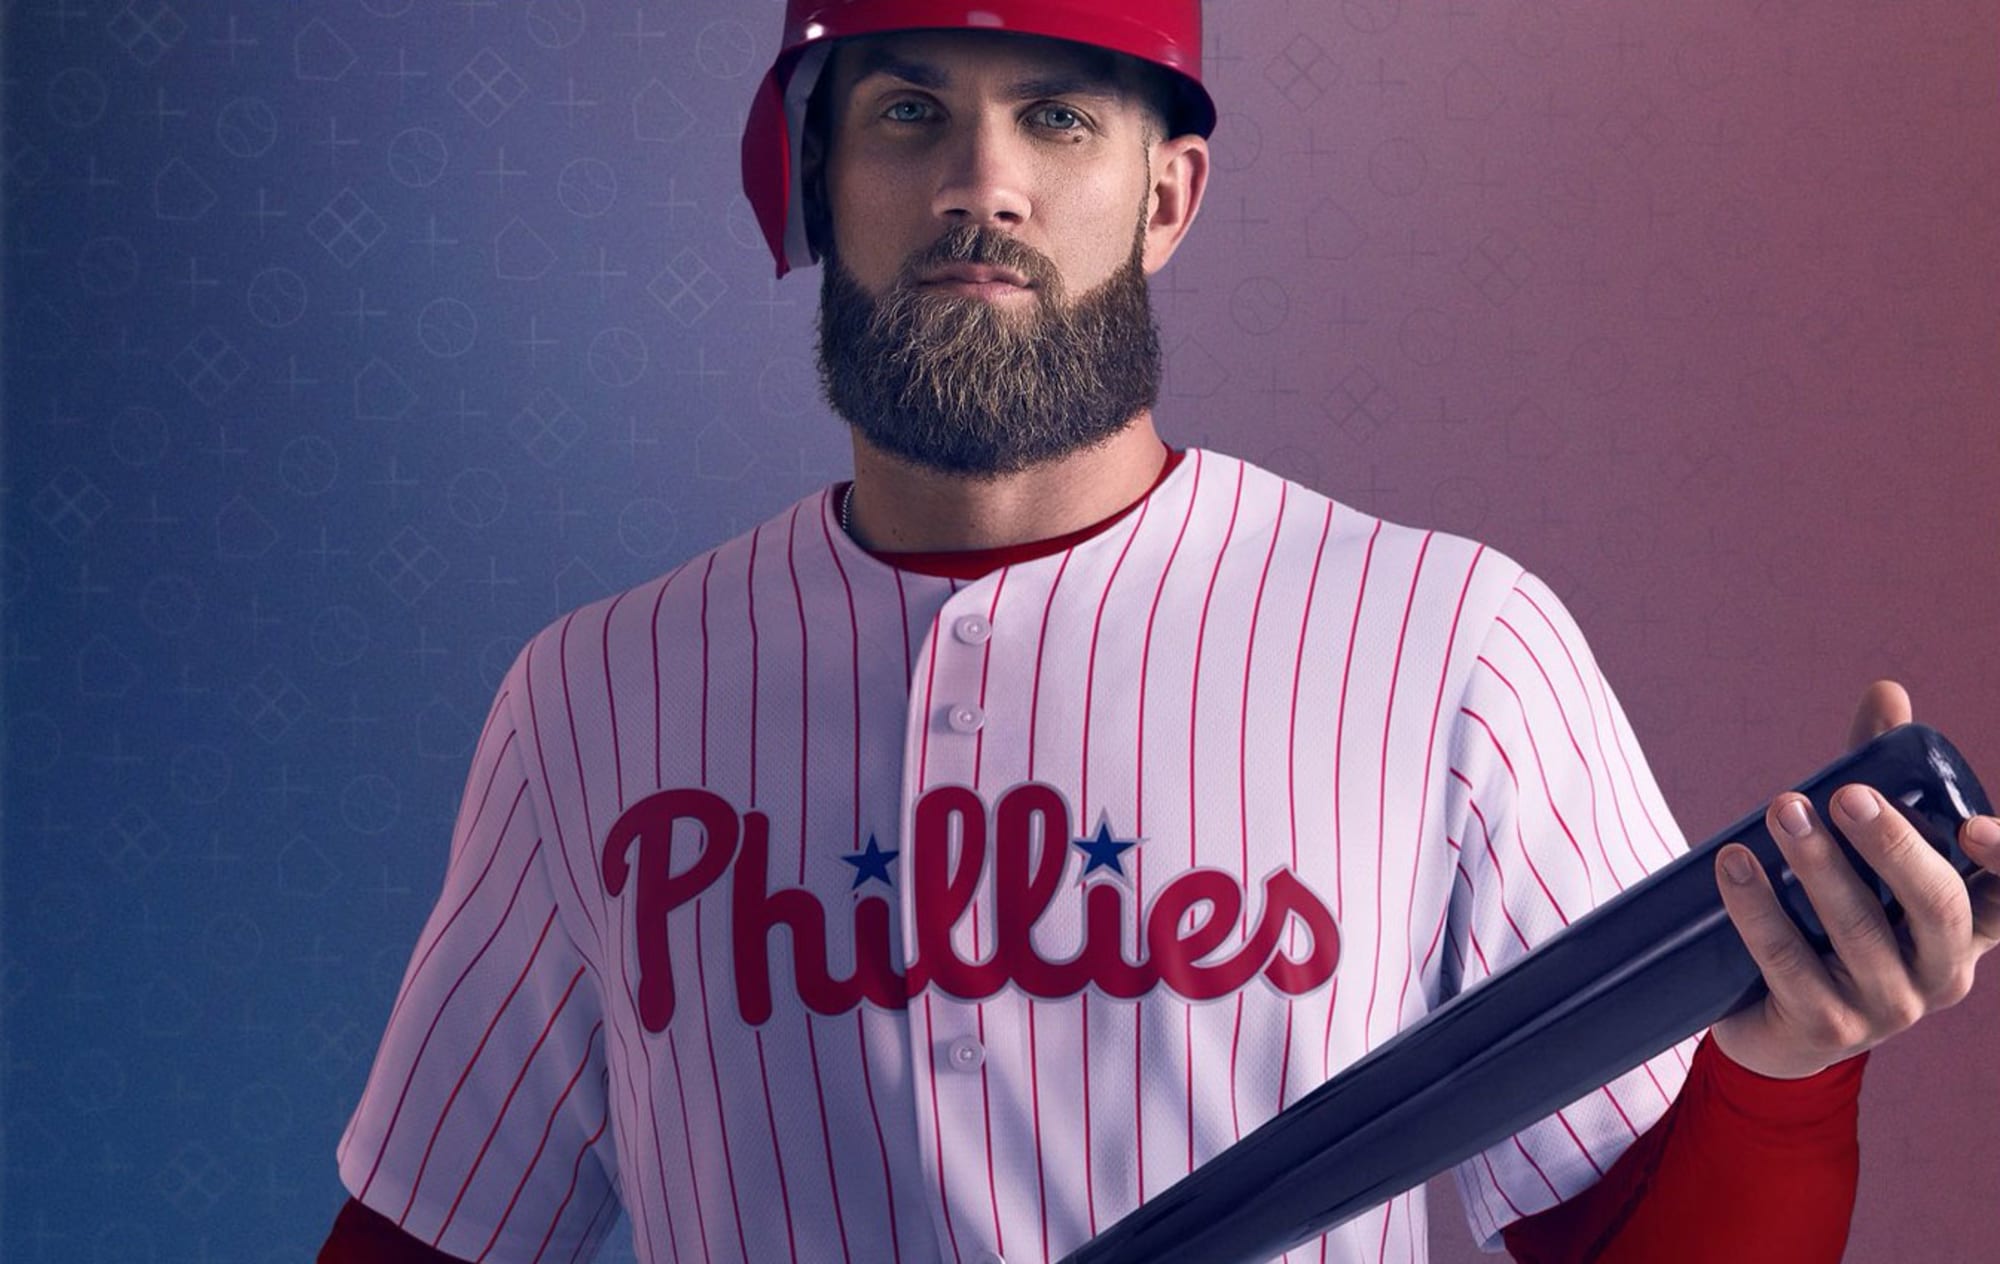 MLB The Show 19 new cover revealed with Bryce Harper in Phillies jersey